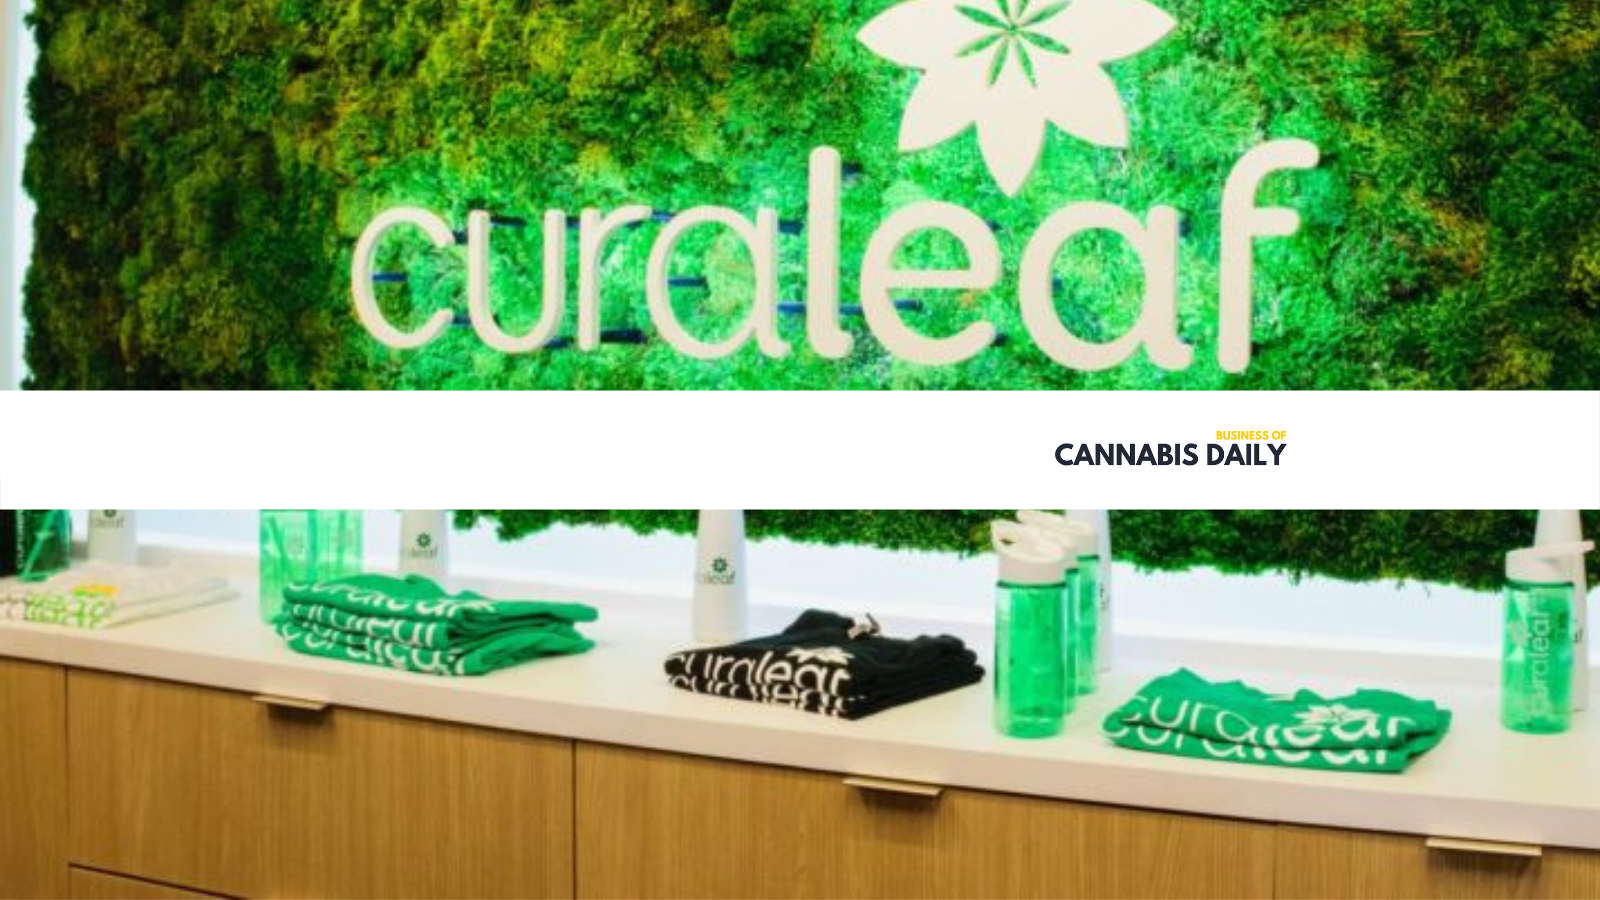 curaleaf CEO explains relationships in the cannabis news